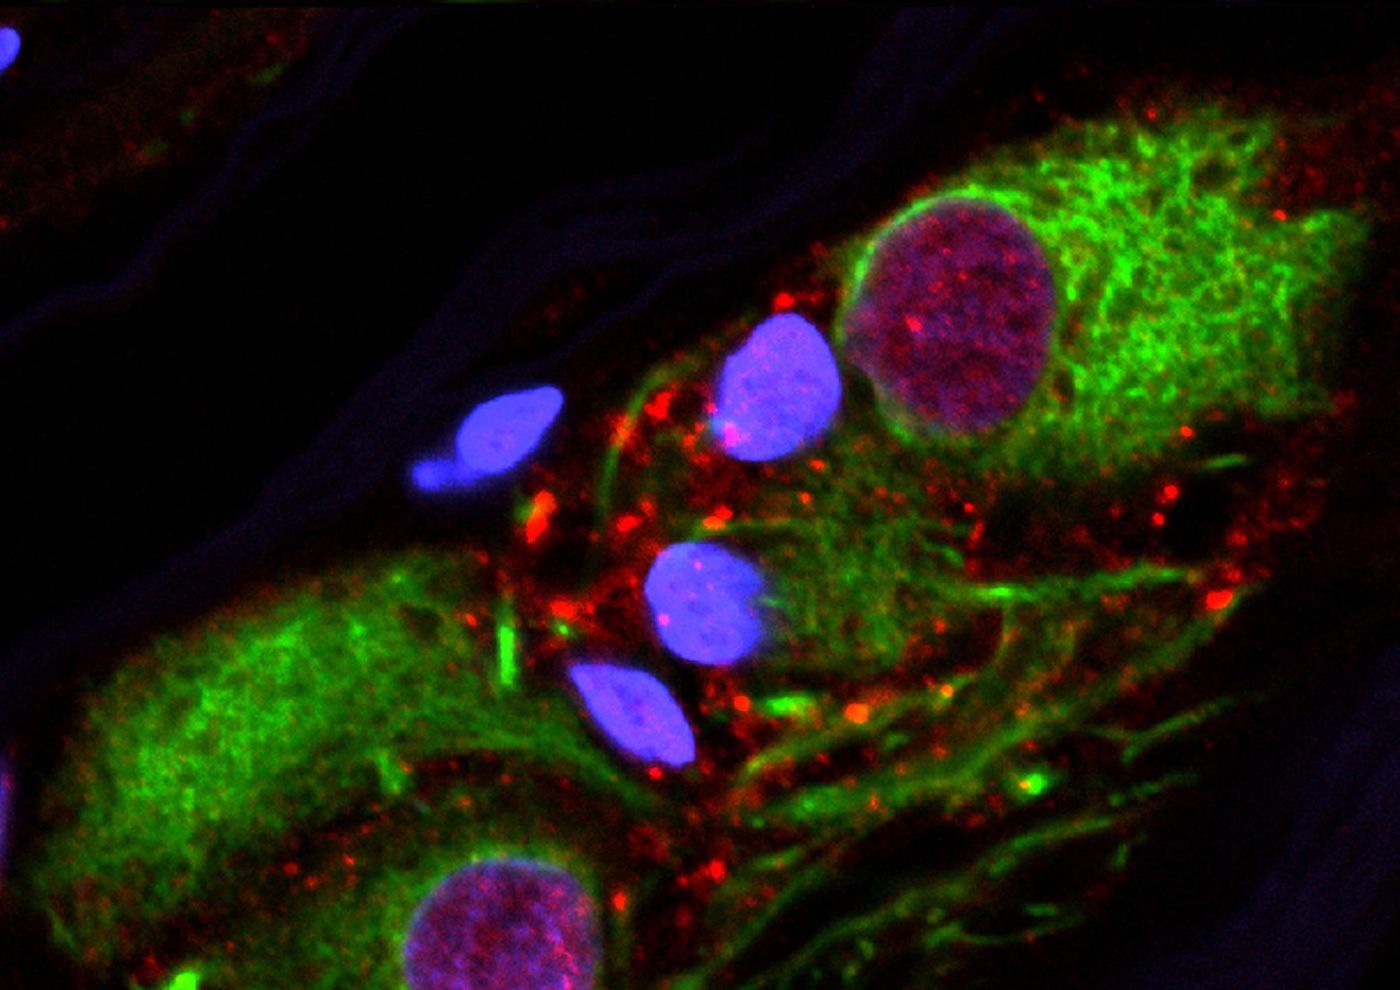 Aggregated alpha-synuclein in the neurons of the appendix. / Credit: Courtesy of Viviane Labrie | Van Andel Research Institute